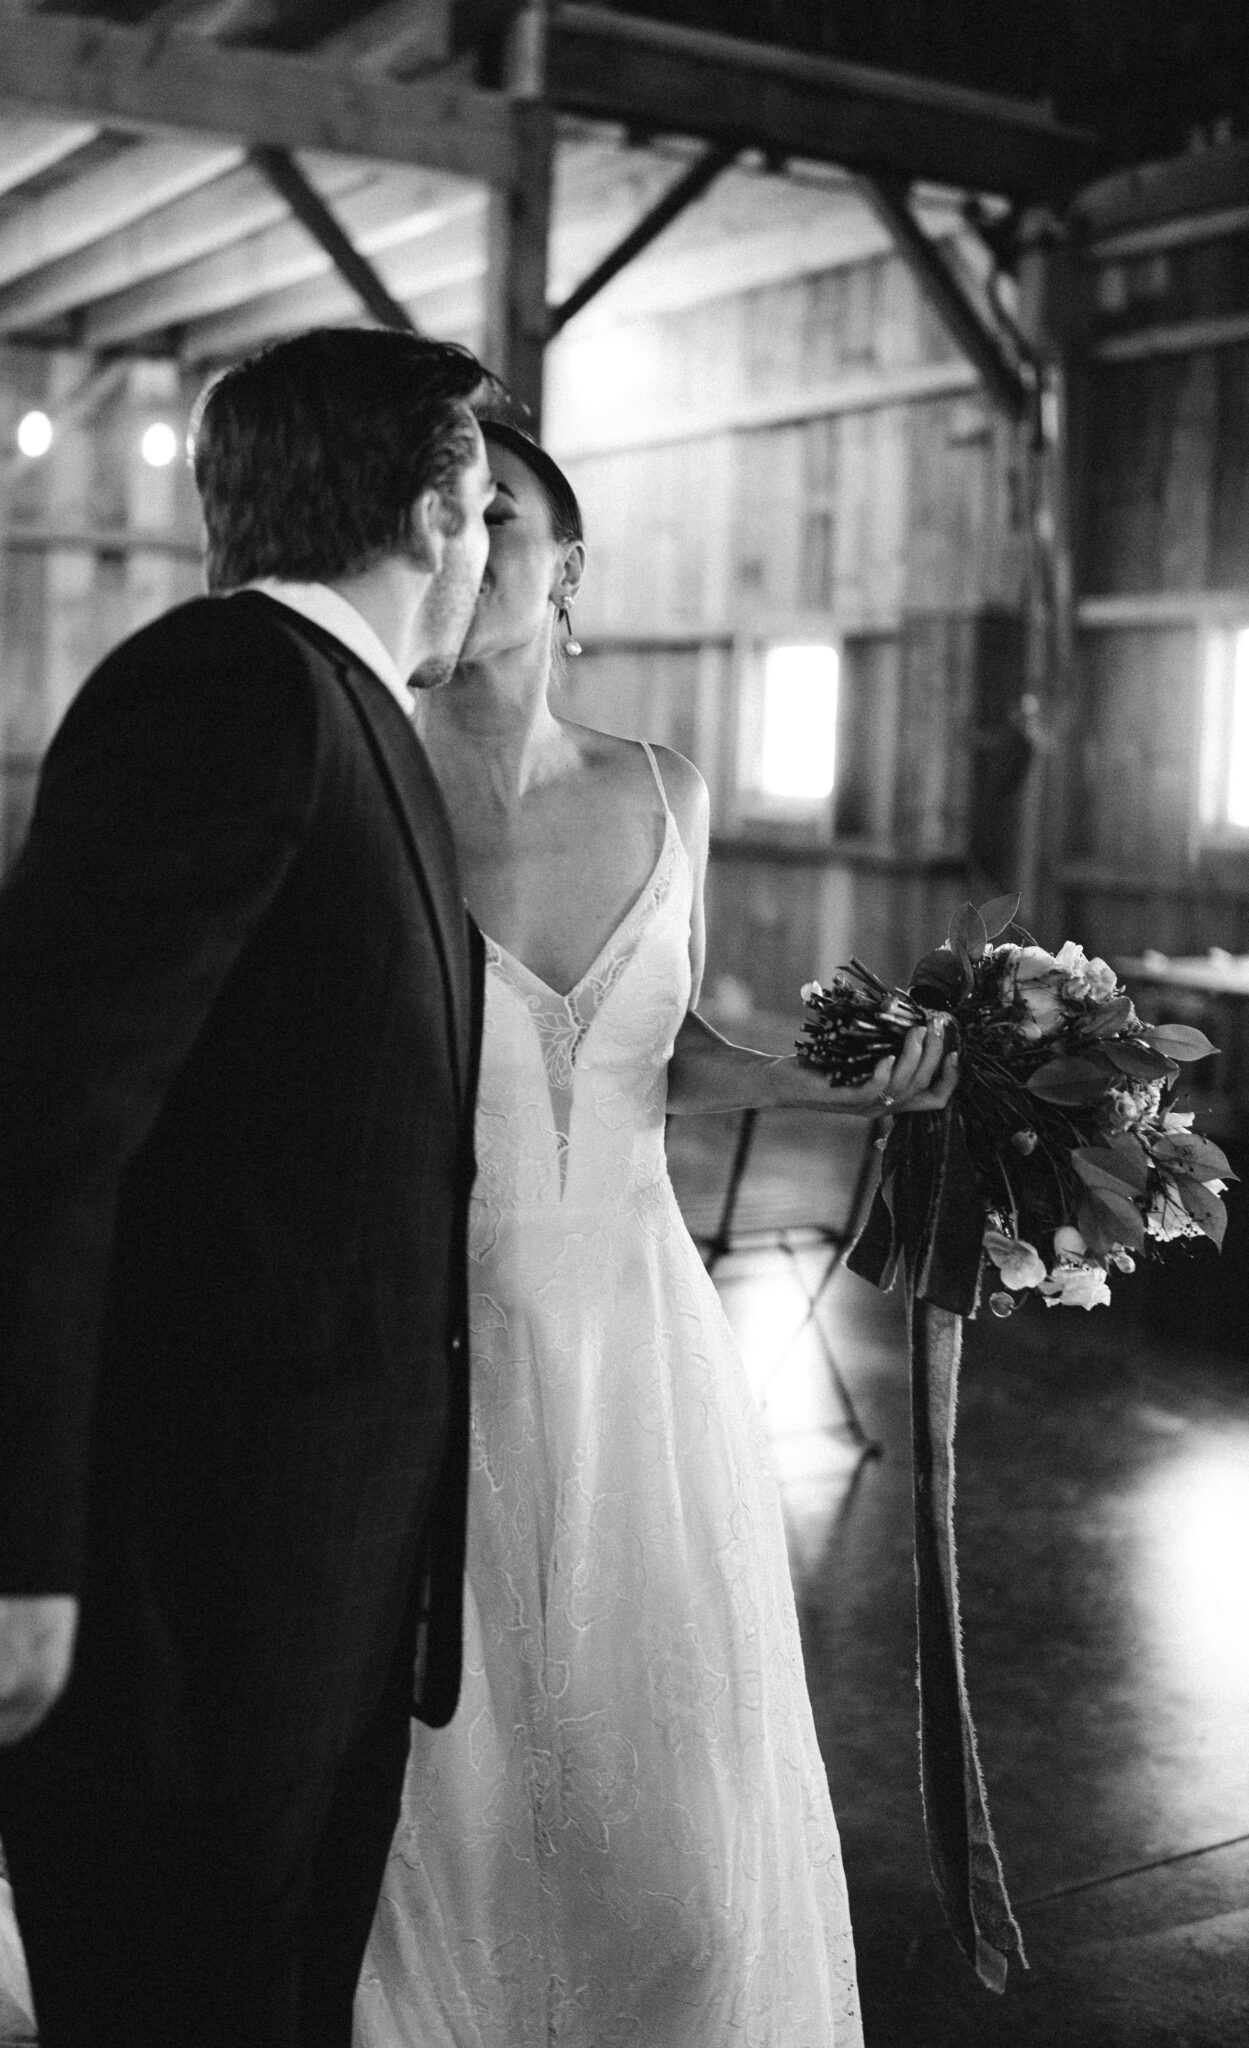 Bride and groom share a kiss at the end of the wedding ceremony aisle, bride holding wedding bouquet, black and white photography. 